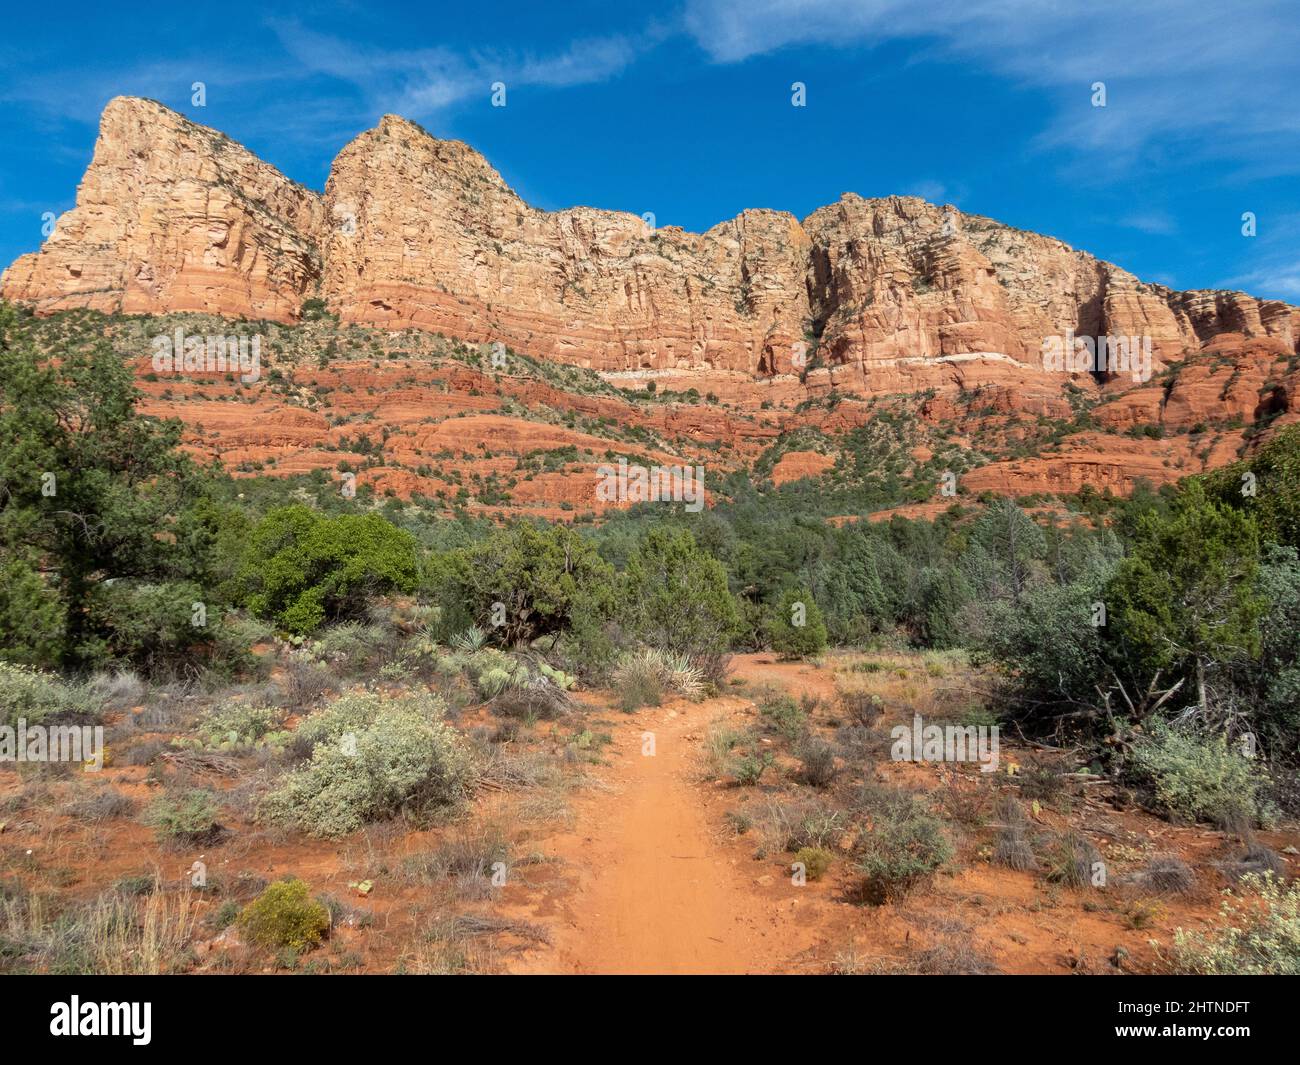 Dirt hiking trail leading to huge rock formations and mountains in the desert. Stock Photo